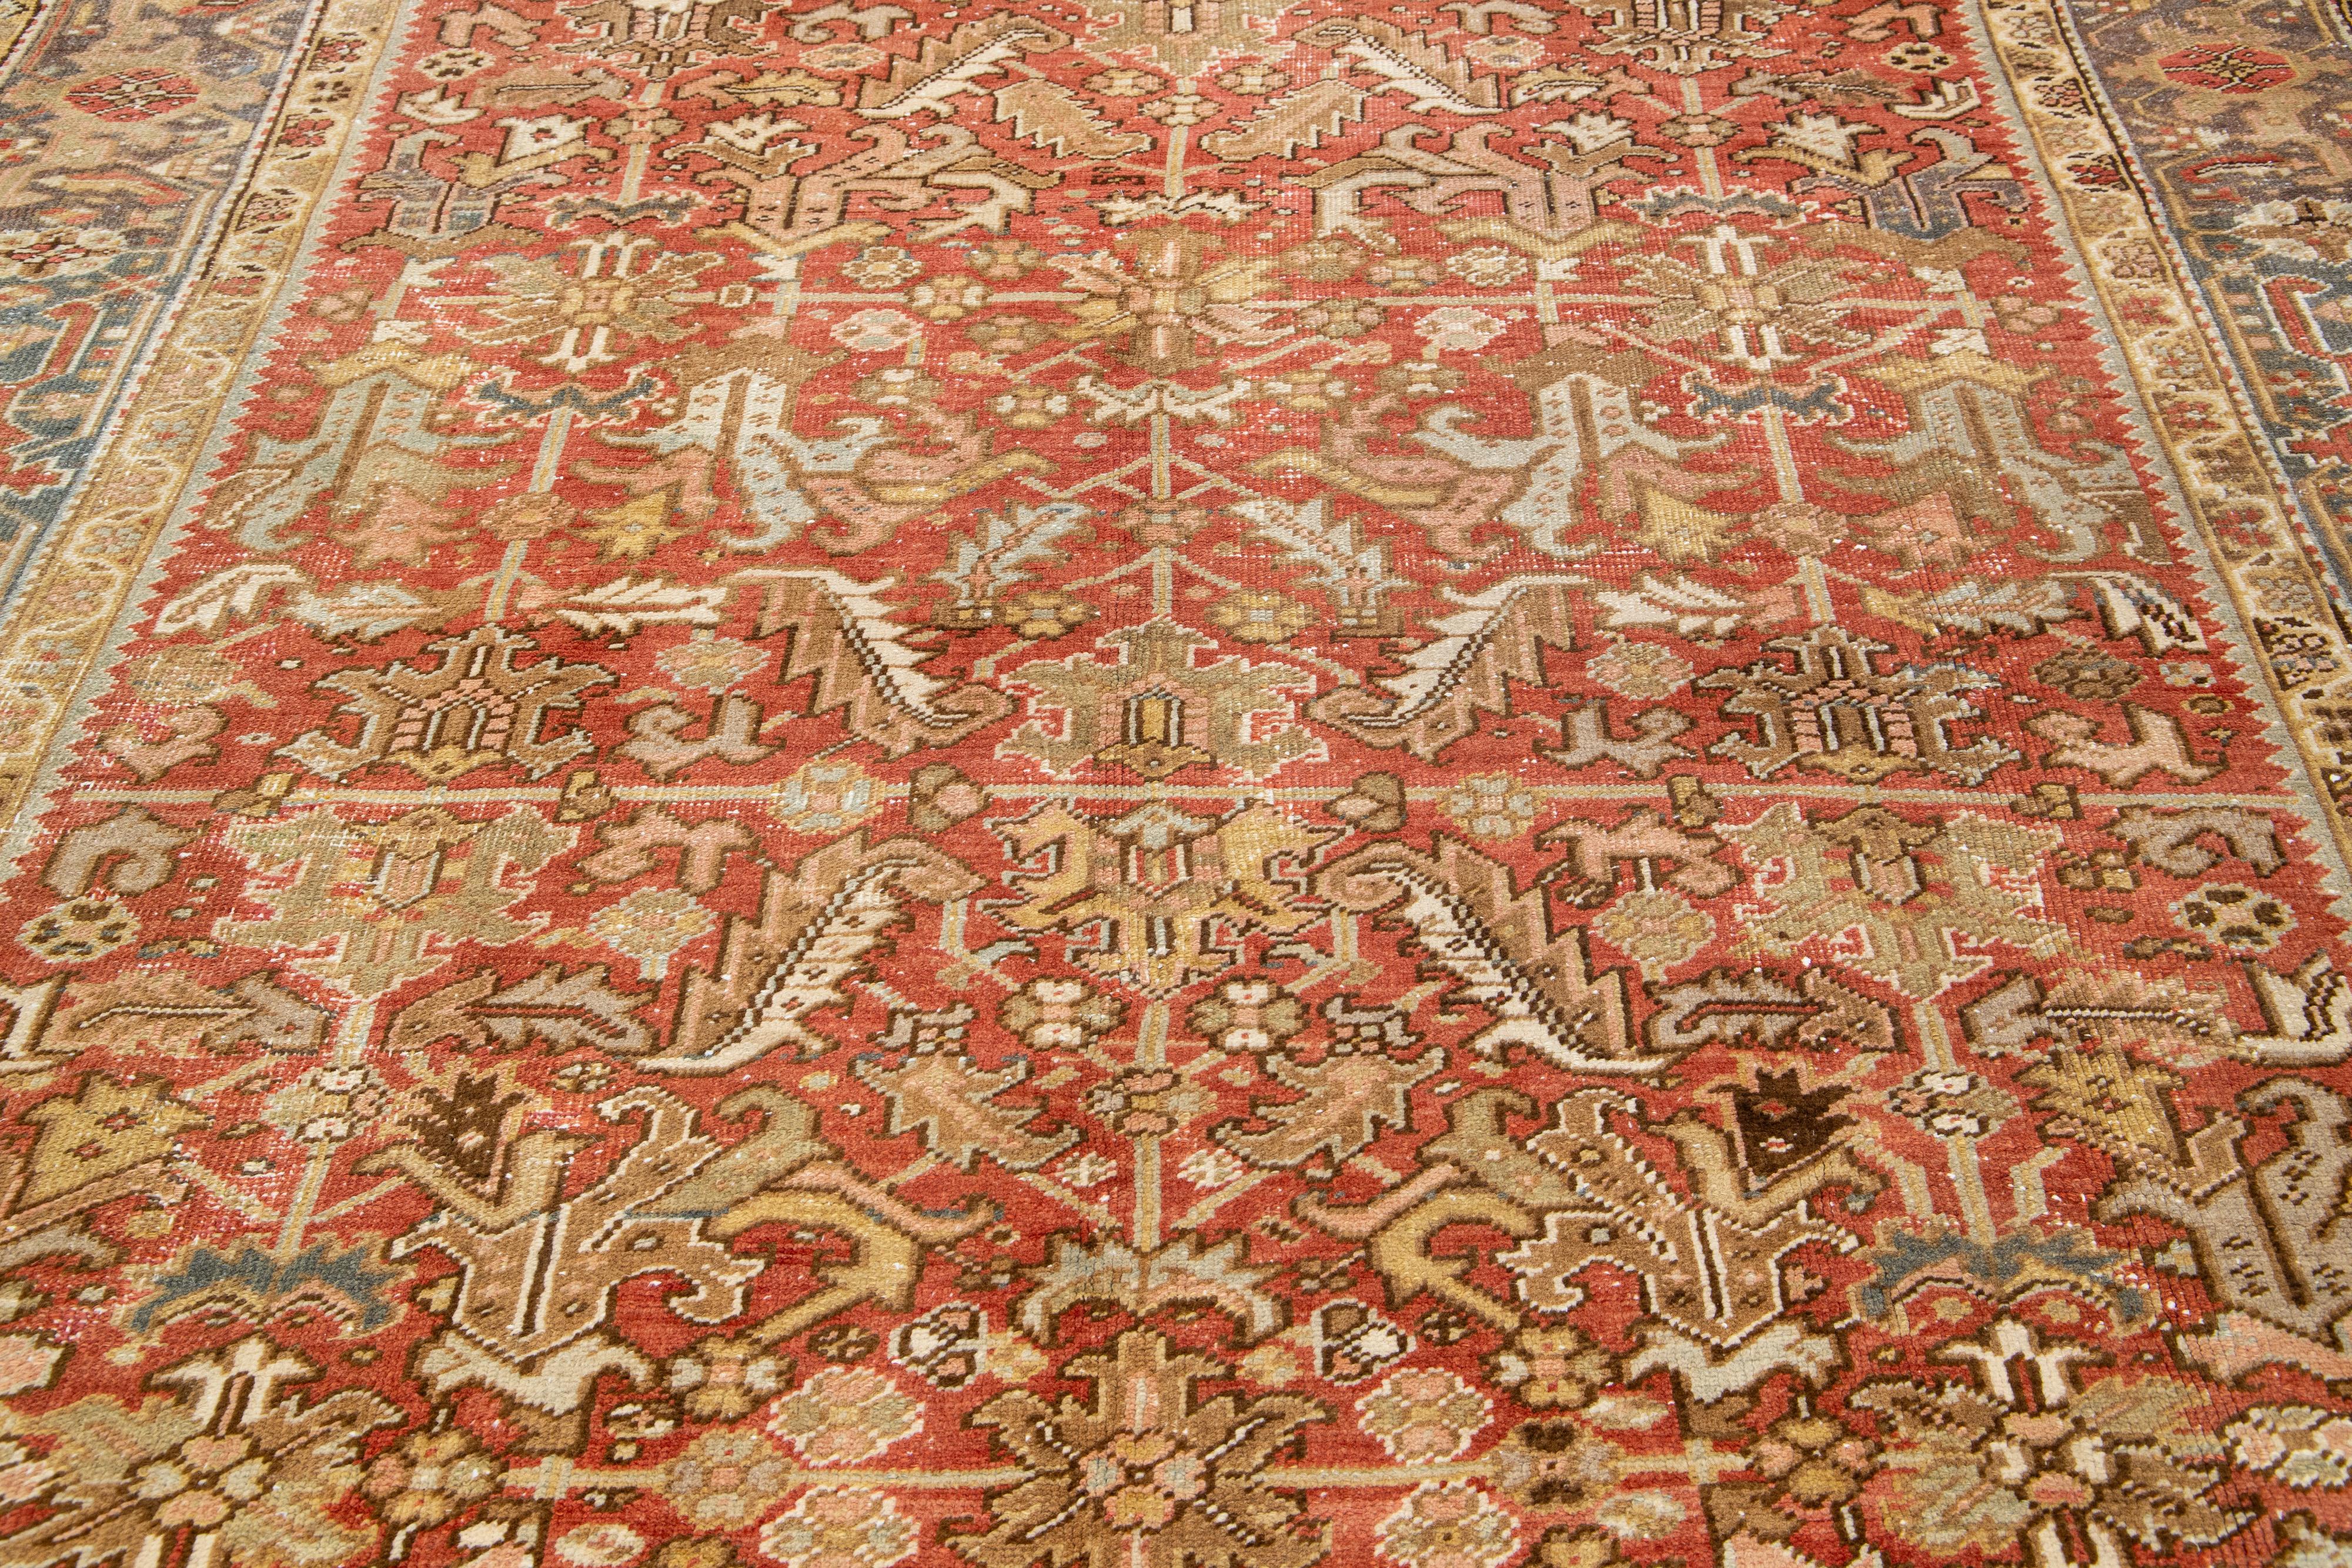 Early 20th Century Allover Antique Persian Heriz Wool Rug In Rust Color From The 1920s For Sale